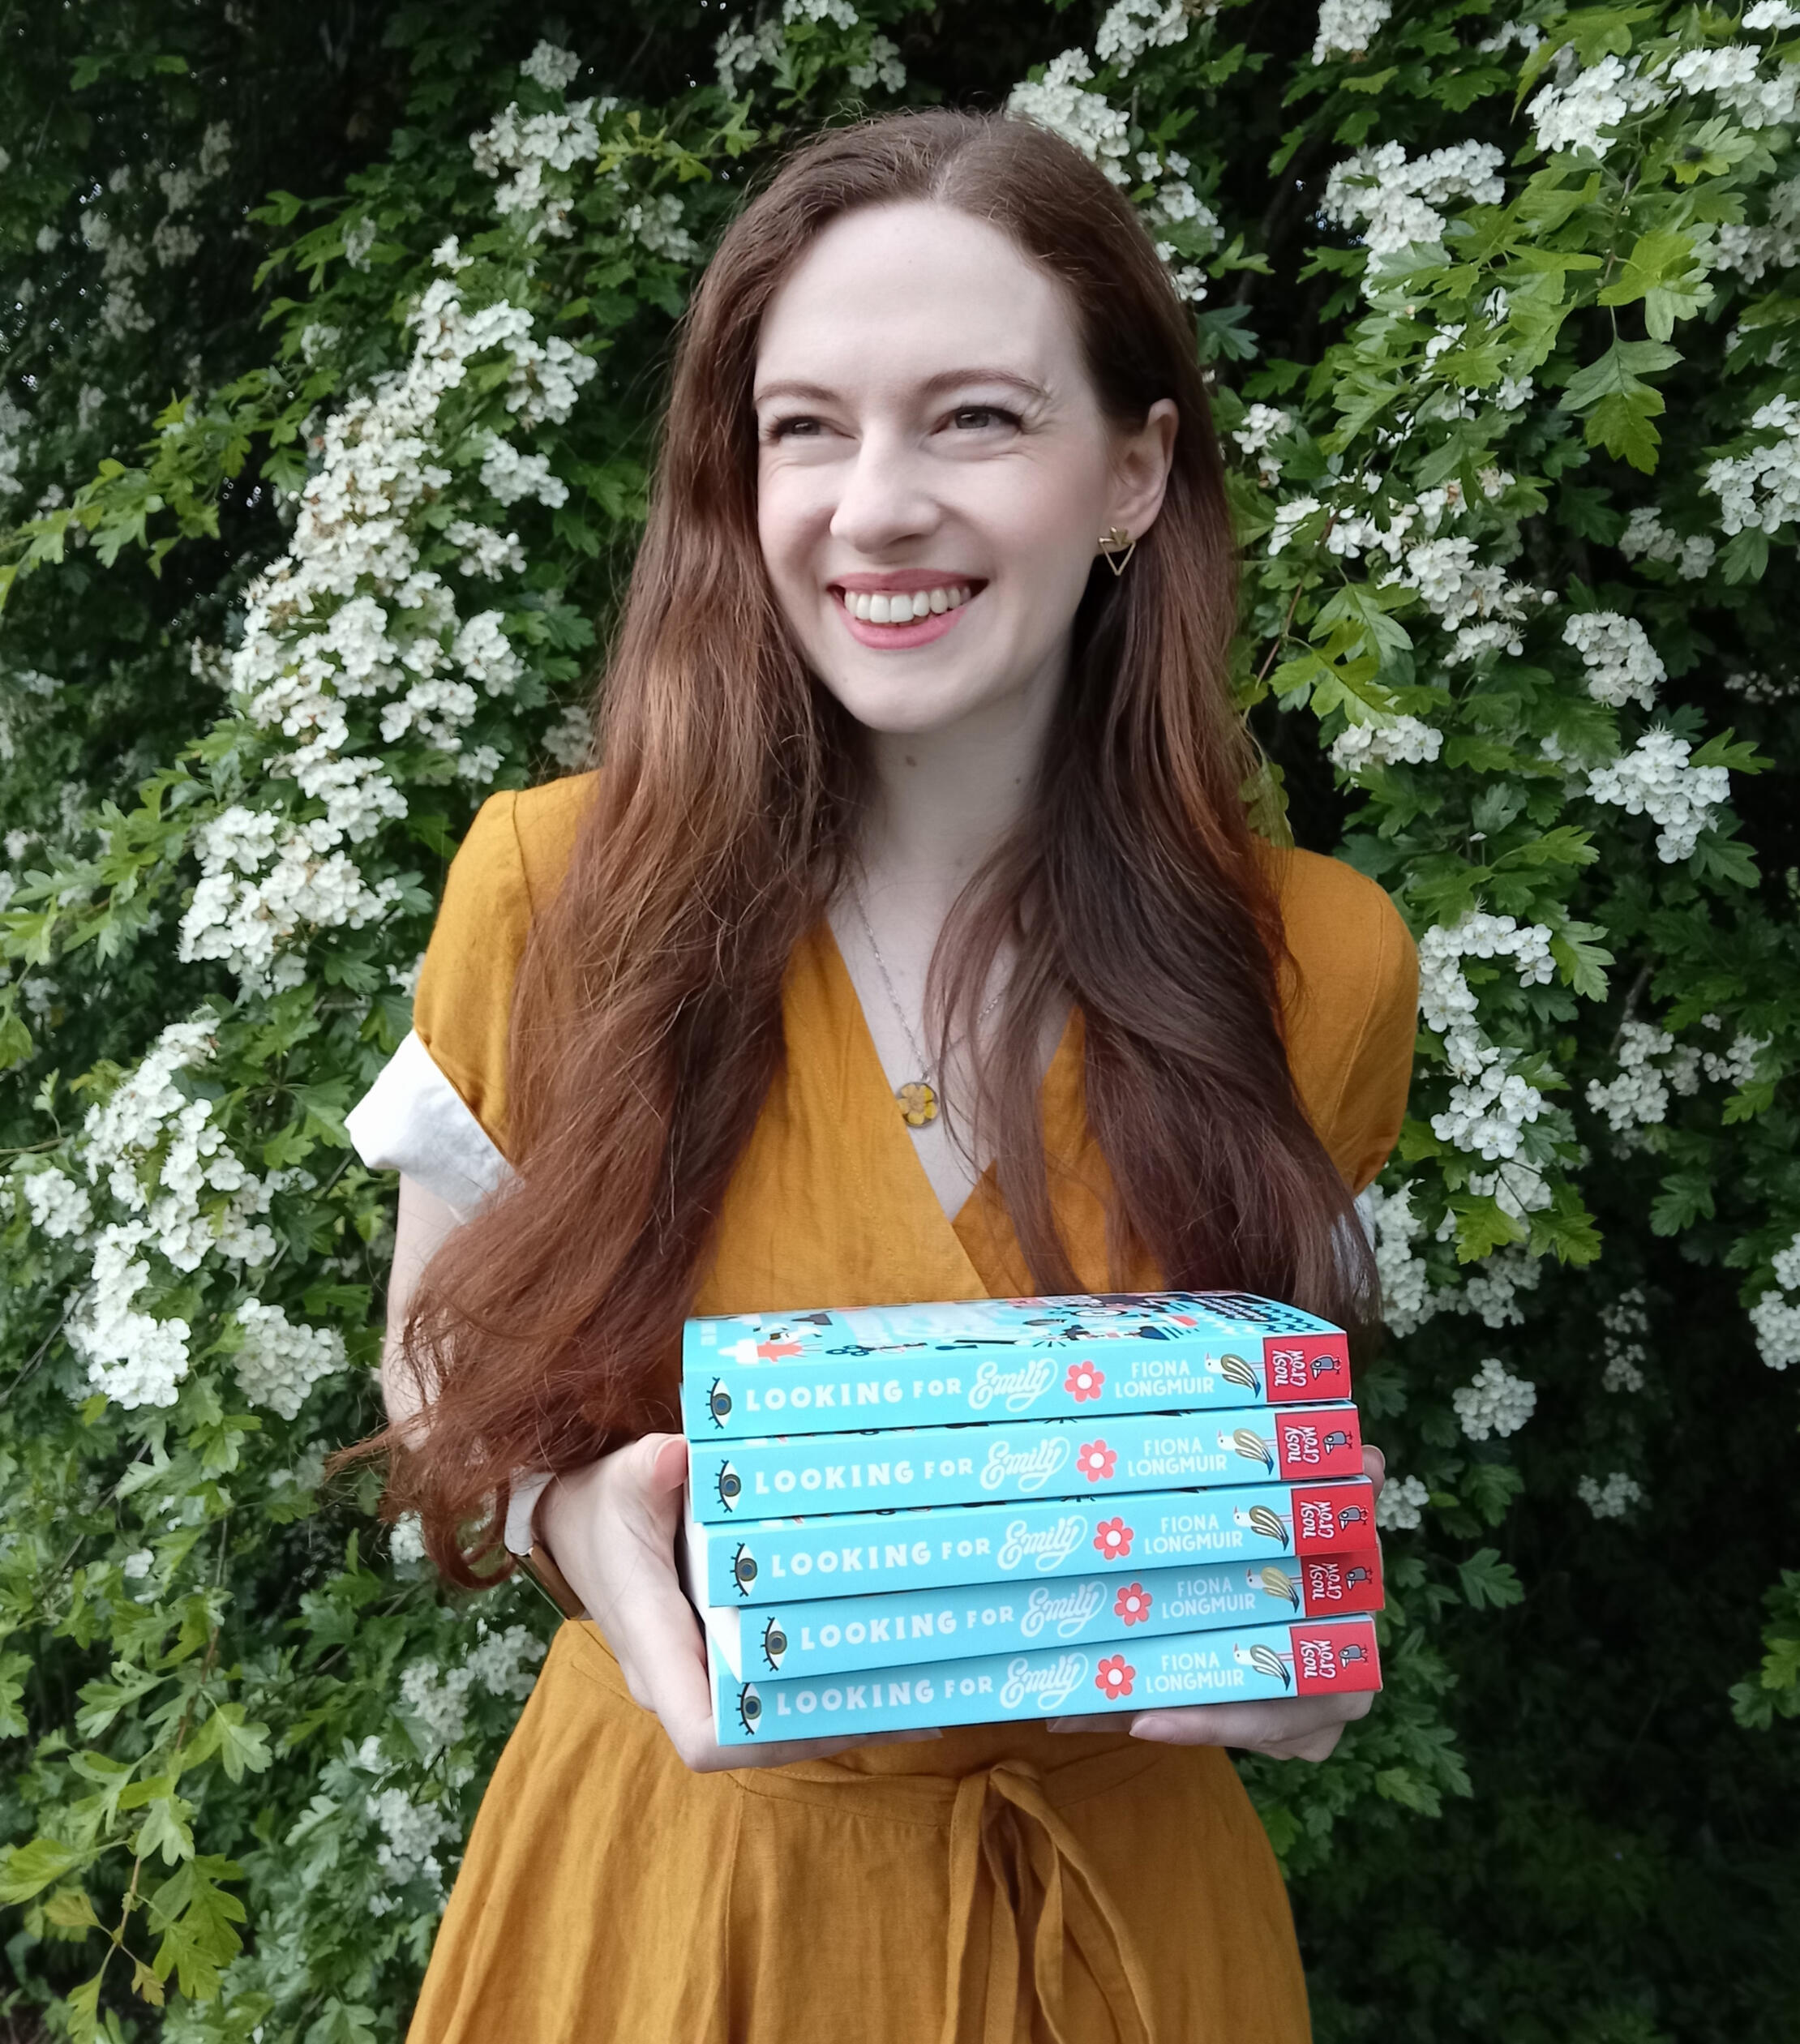 Fiona is looking to the side of the camera and laughing. She is holding a stack of Looking for Emily books and wearing a yellow linen dress. She is standing in front of a hawthorn tree covered in frothy white blossom.